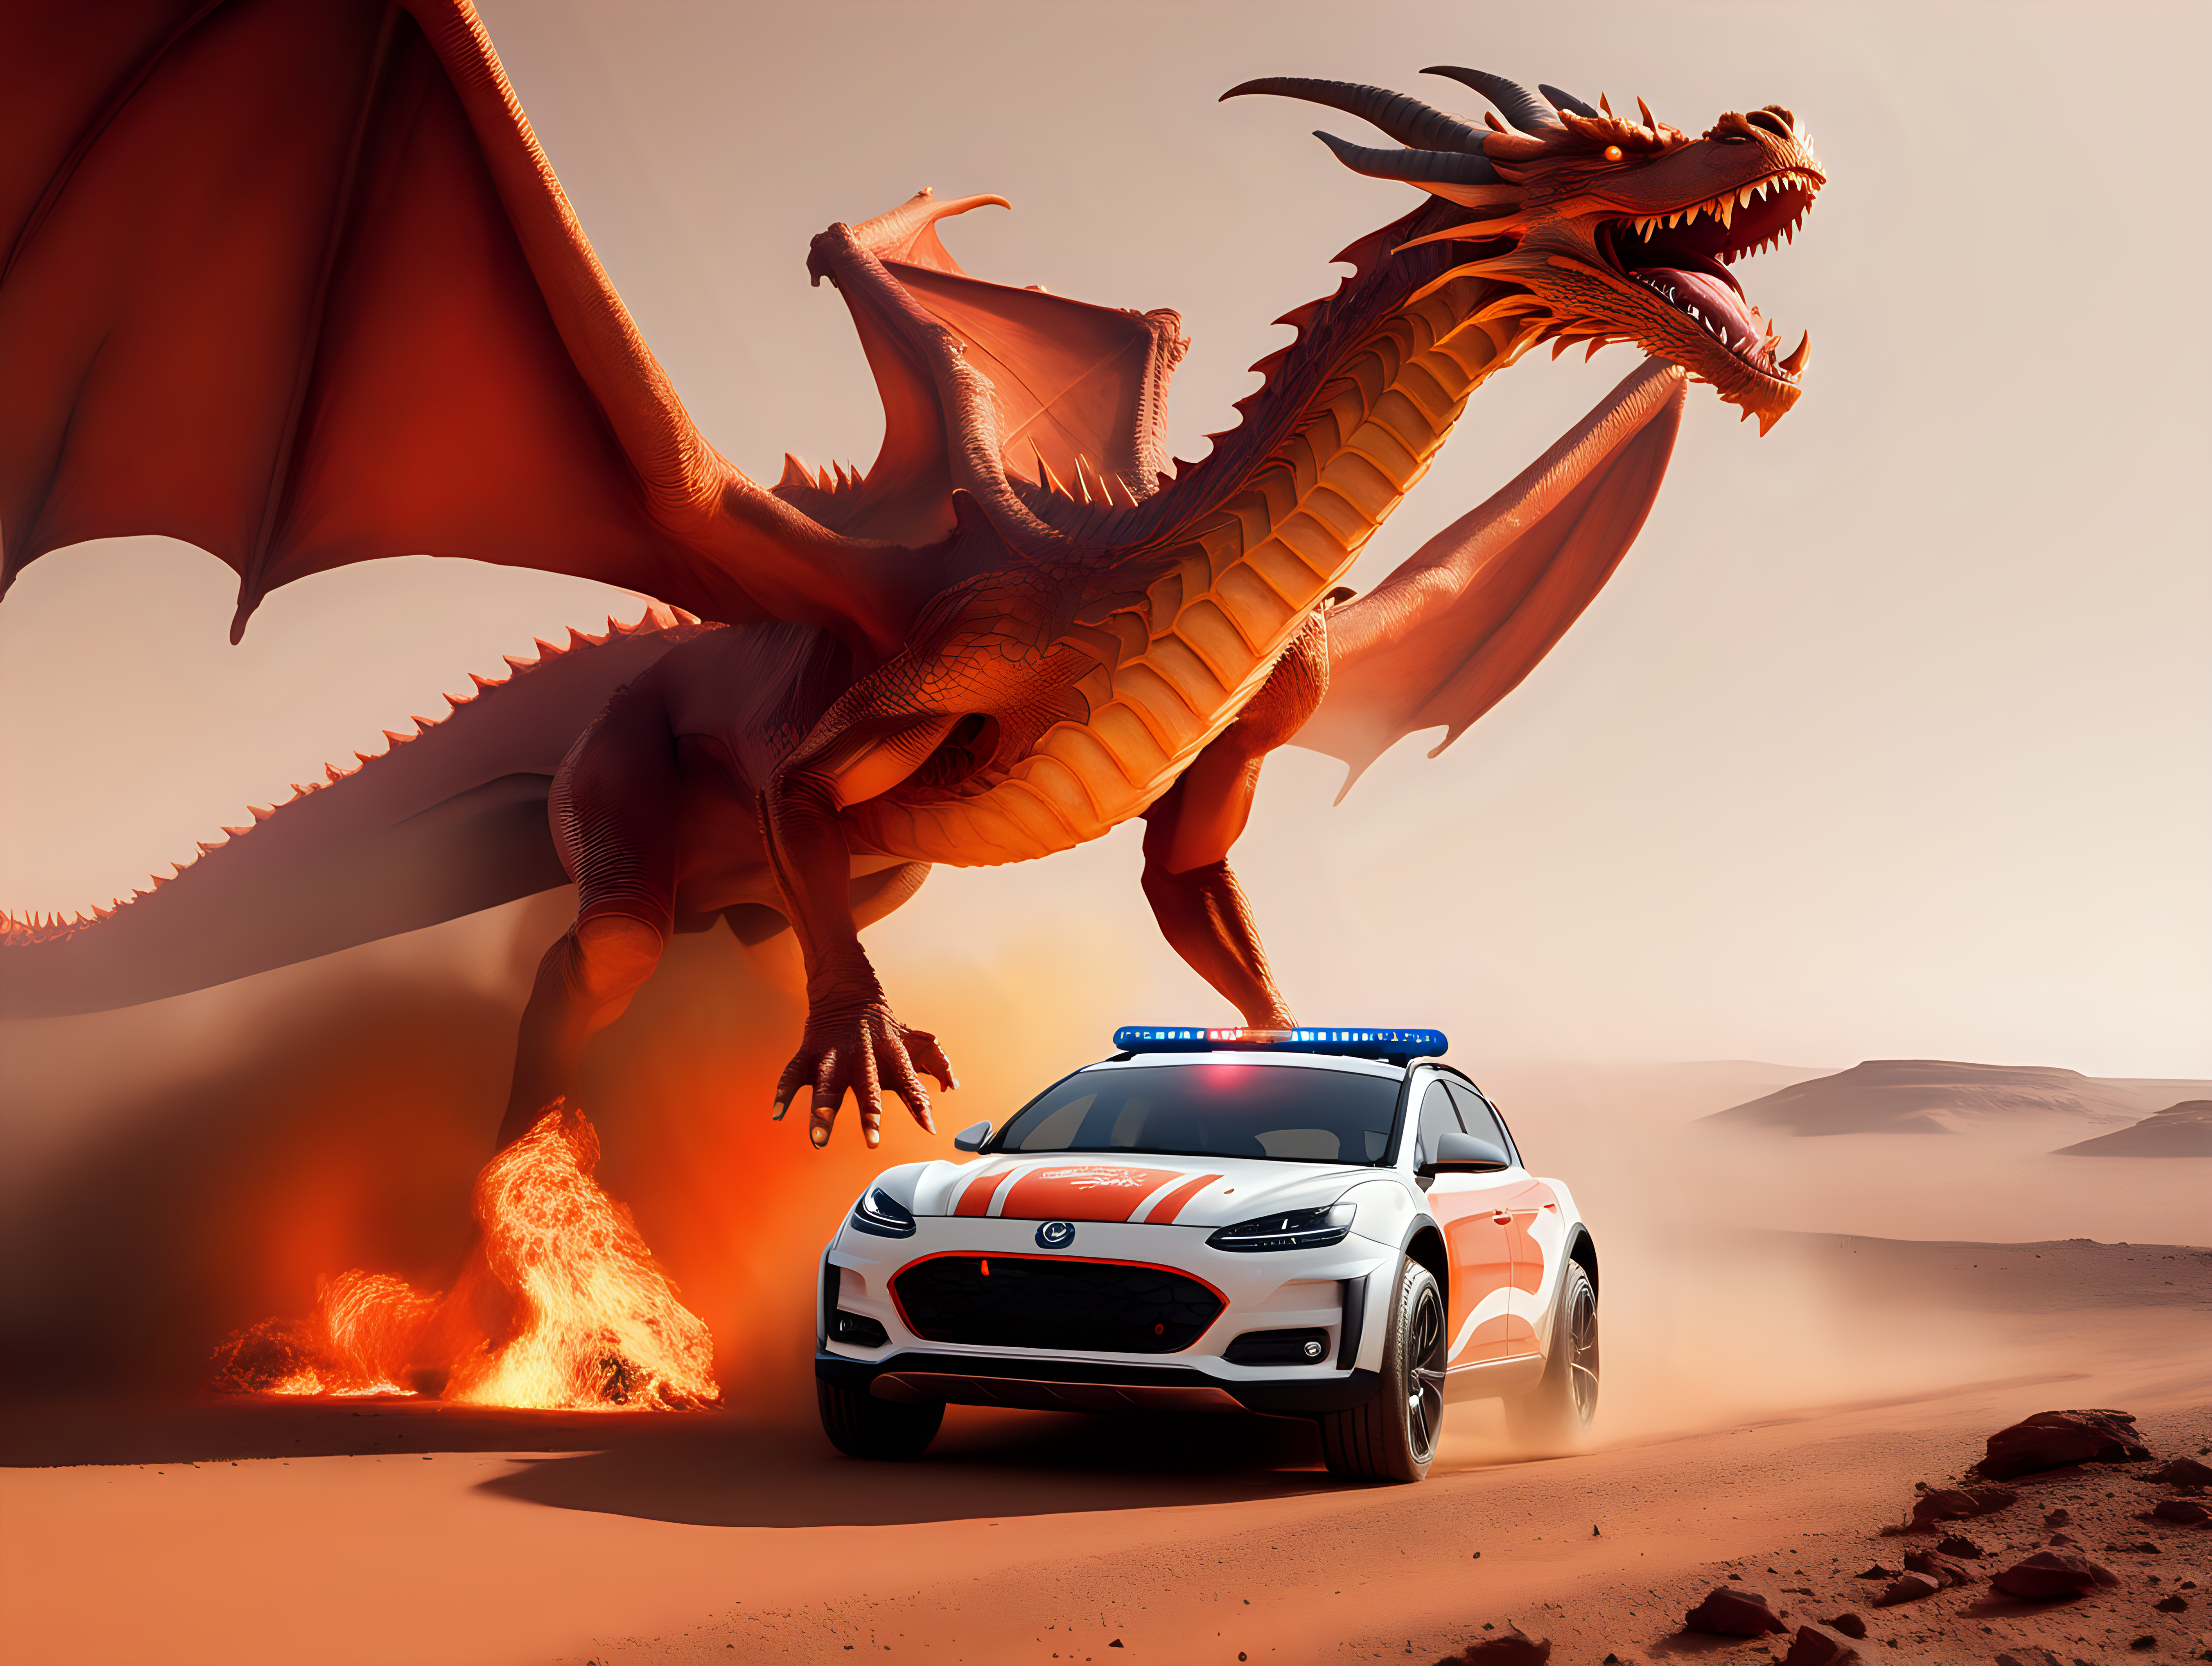 European sports car driving on Mars chased by a fire breathing dragon